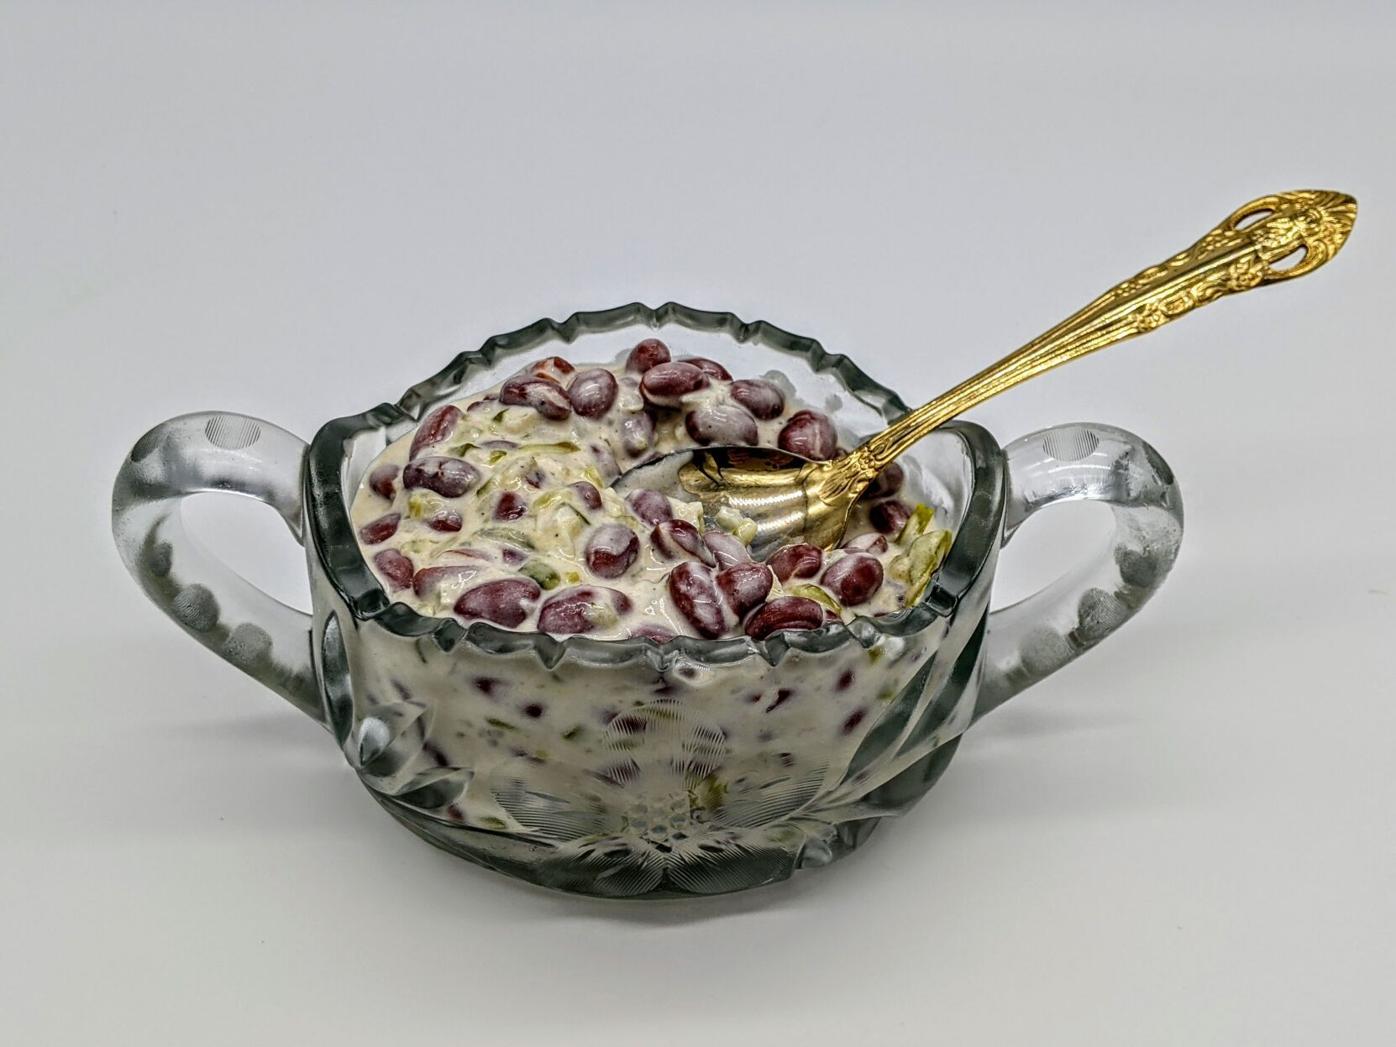 kidney bean salad in glass bowl with serving spoon